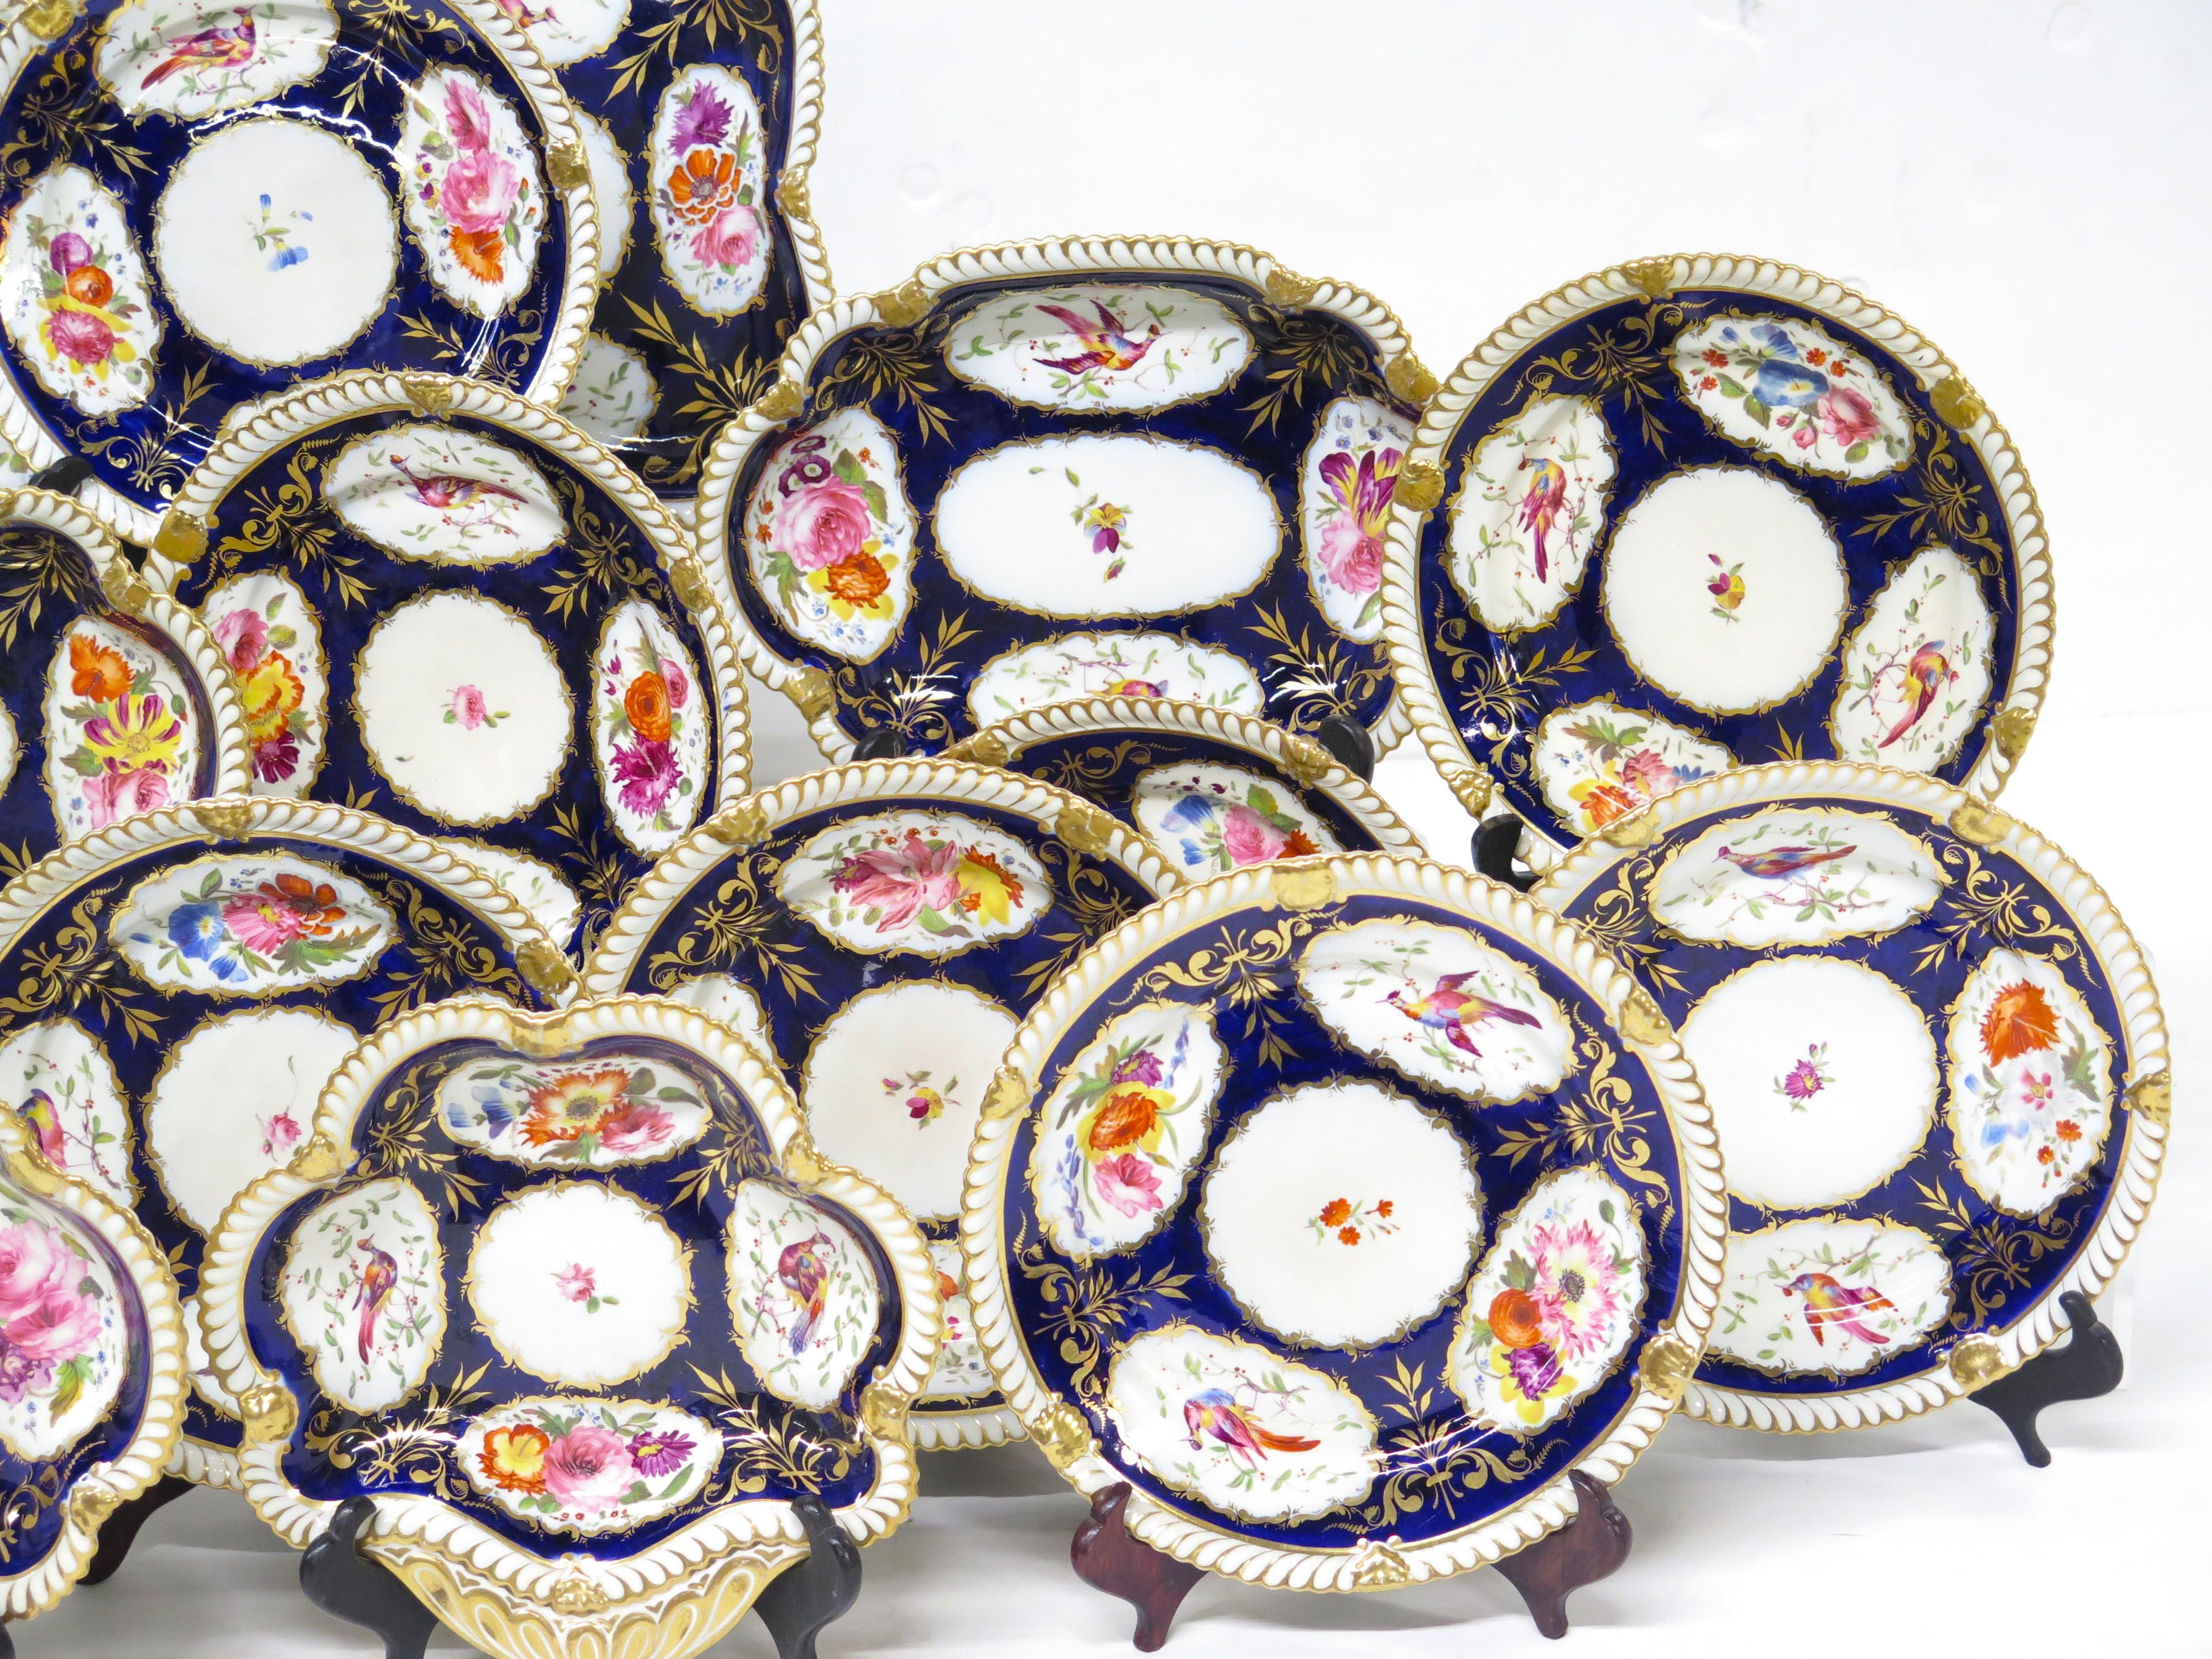 Georgian A Group of Royal Crown Derby-Style Cobalt & Floral Hand-Painted China For Sale